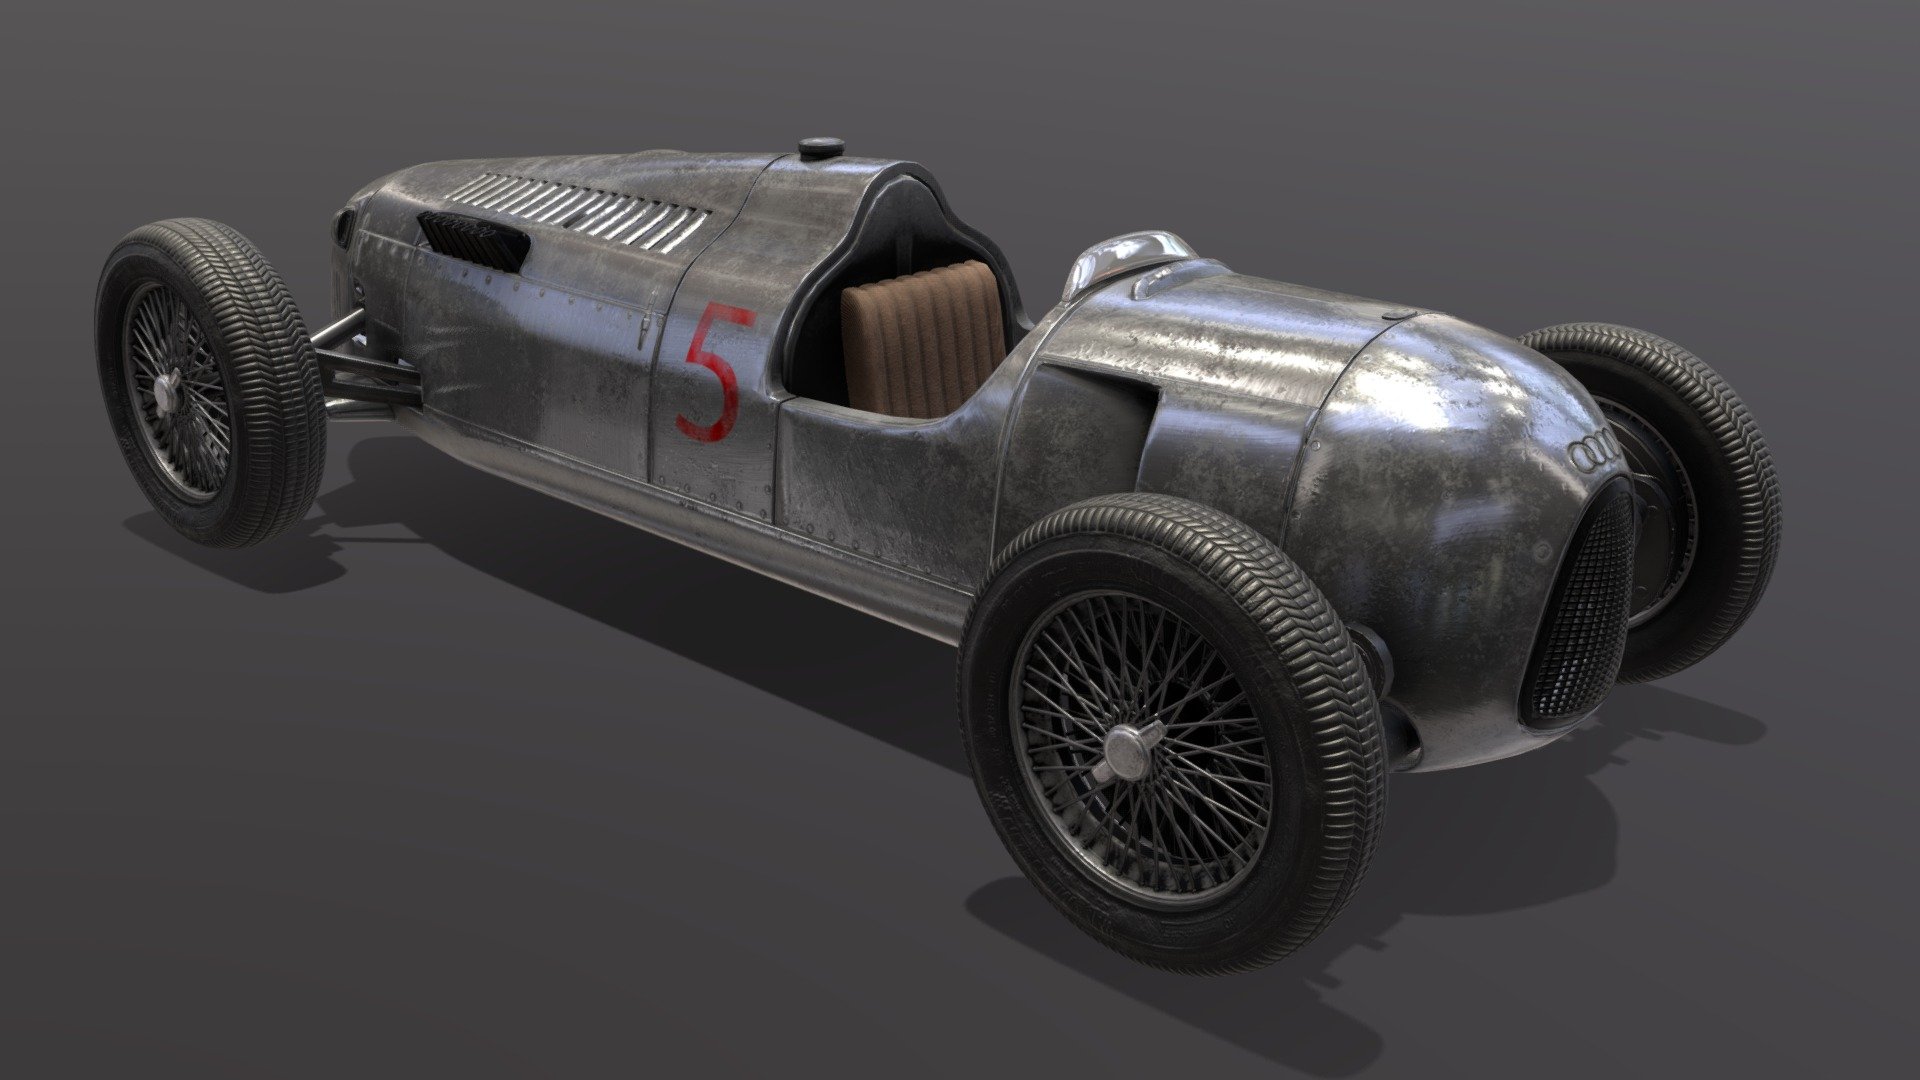 Auto Union Type C,

Modeled in Blender, materials made in Substance.

I hope you enjoy it.

Please feel free to add comments and feedback, I will be glad to keep improving my models 3d model